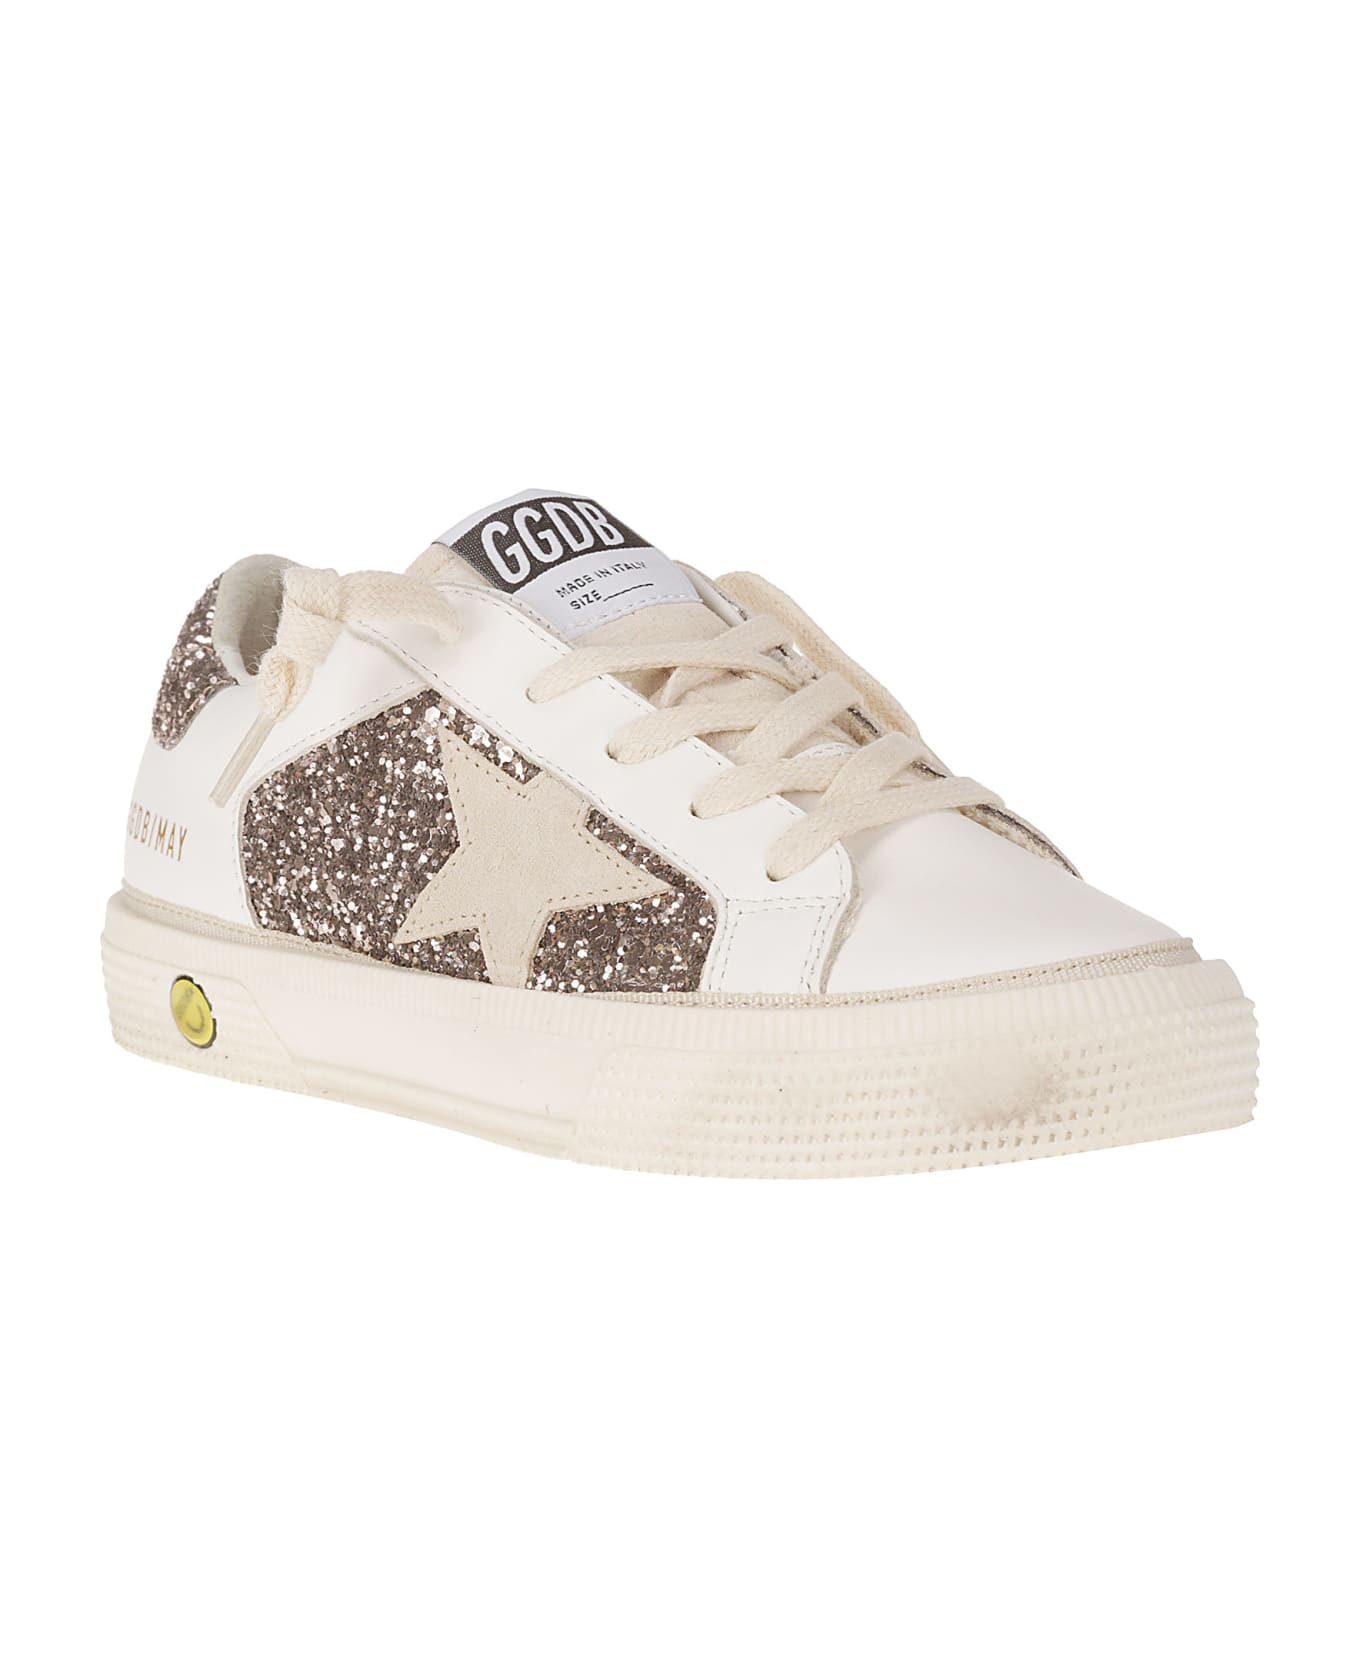 Golden Goose May Leather And Glitter Upper Suede Star Glitte - OPTIC WHITE/CINDER/SEED PEARL シューズ